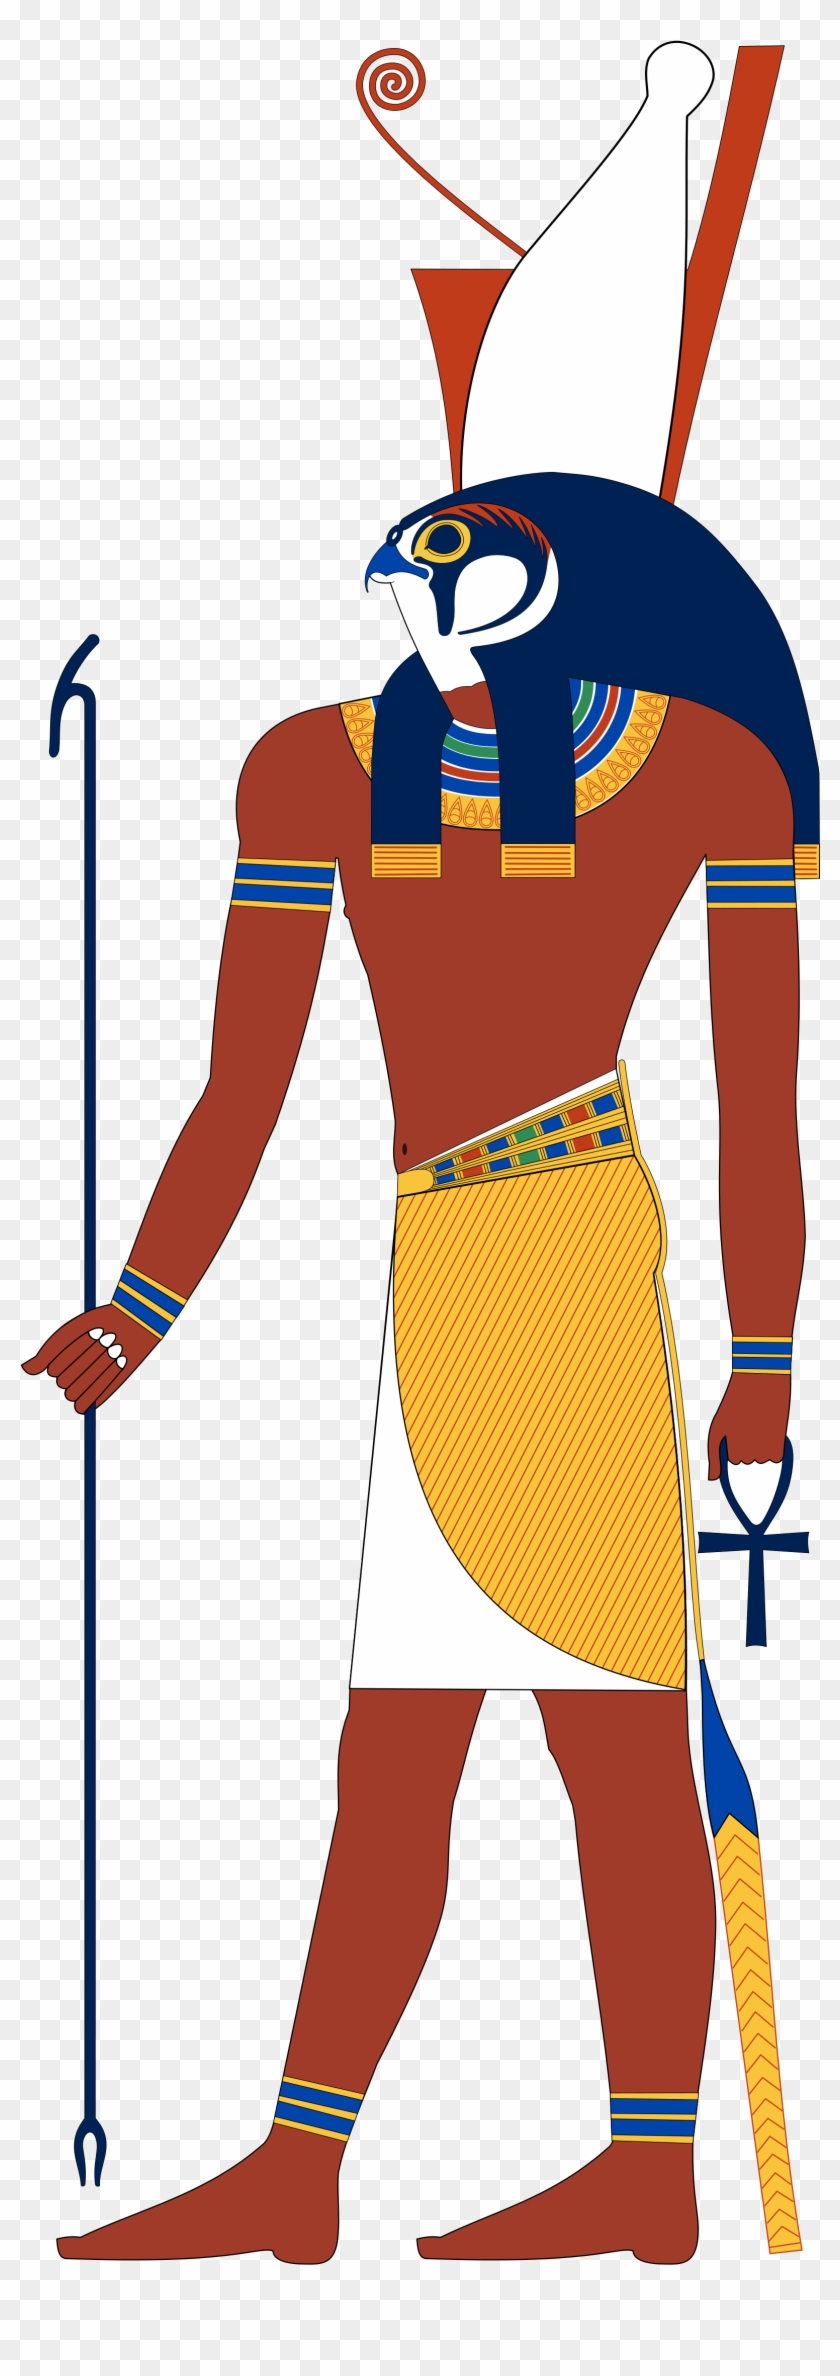 He Was Also The Son Of Osiris And Isis - Ancient Egypt God Khonsu #493570